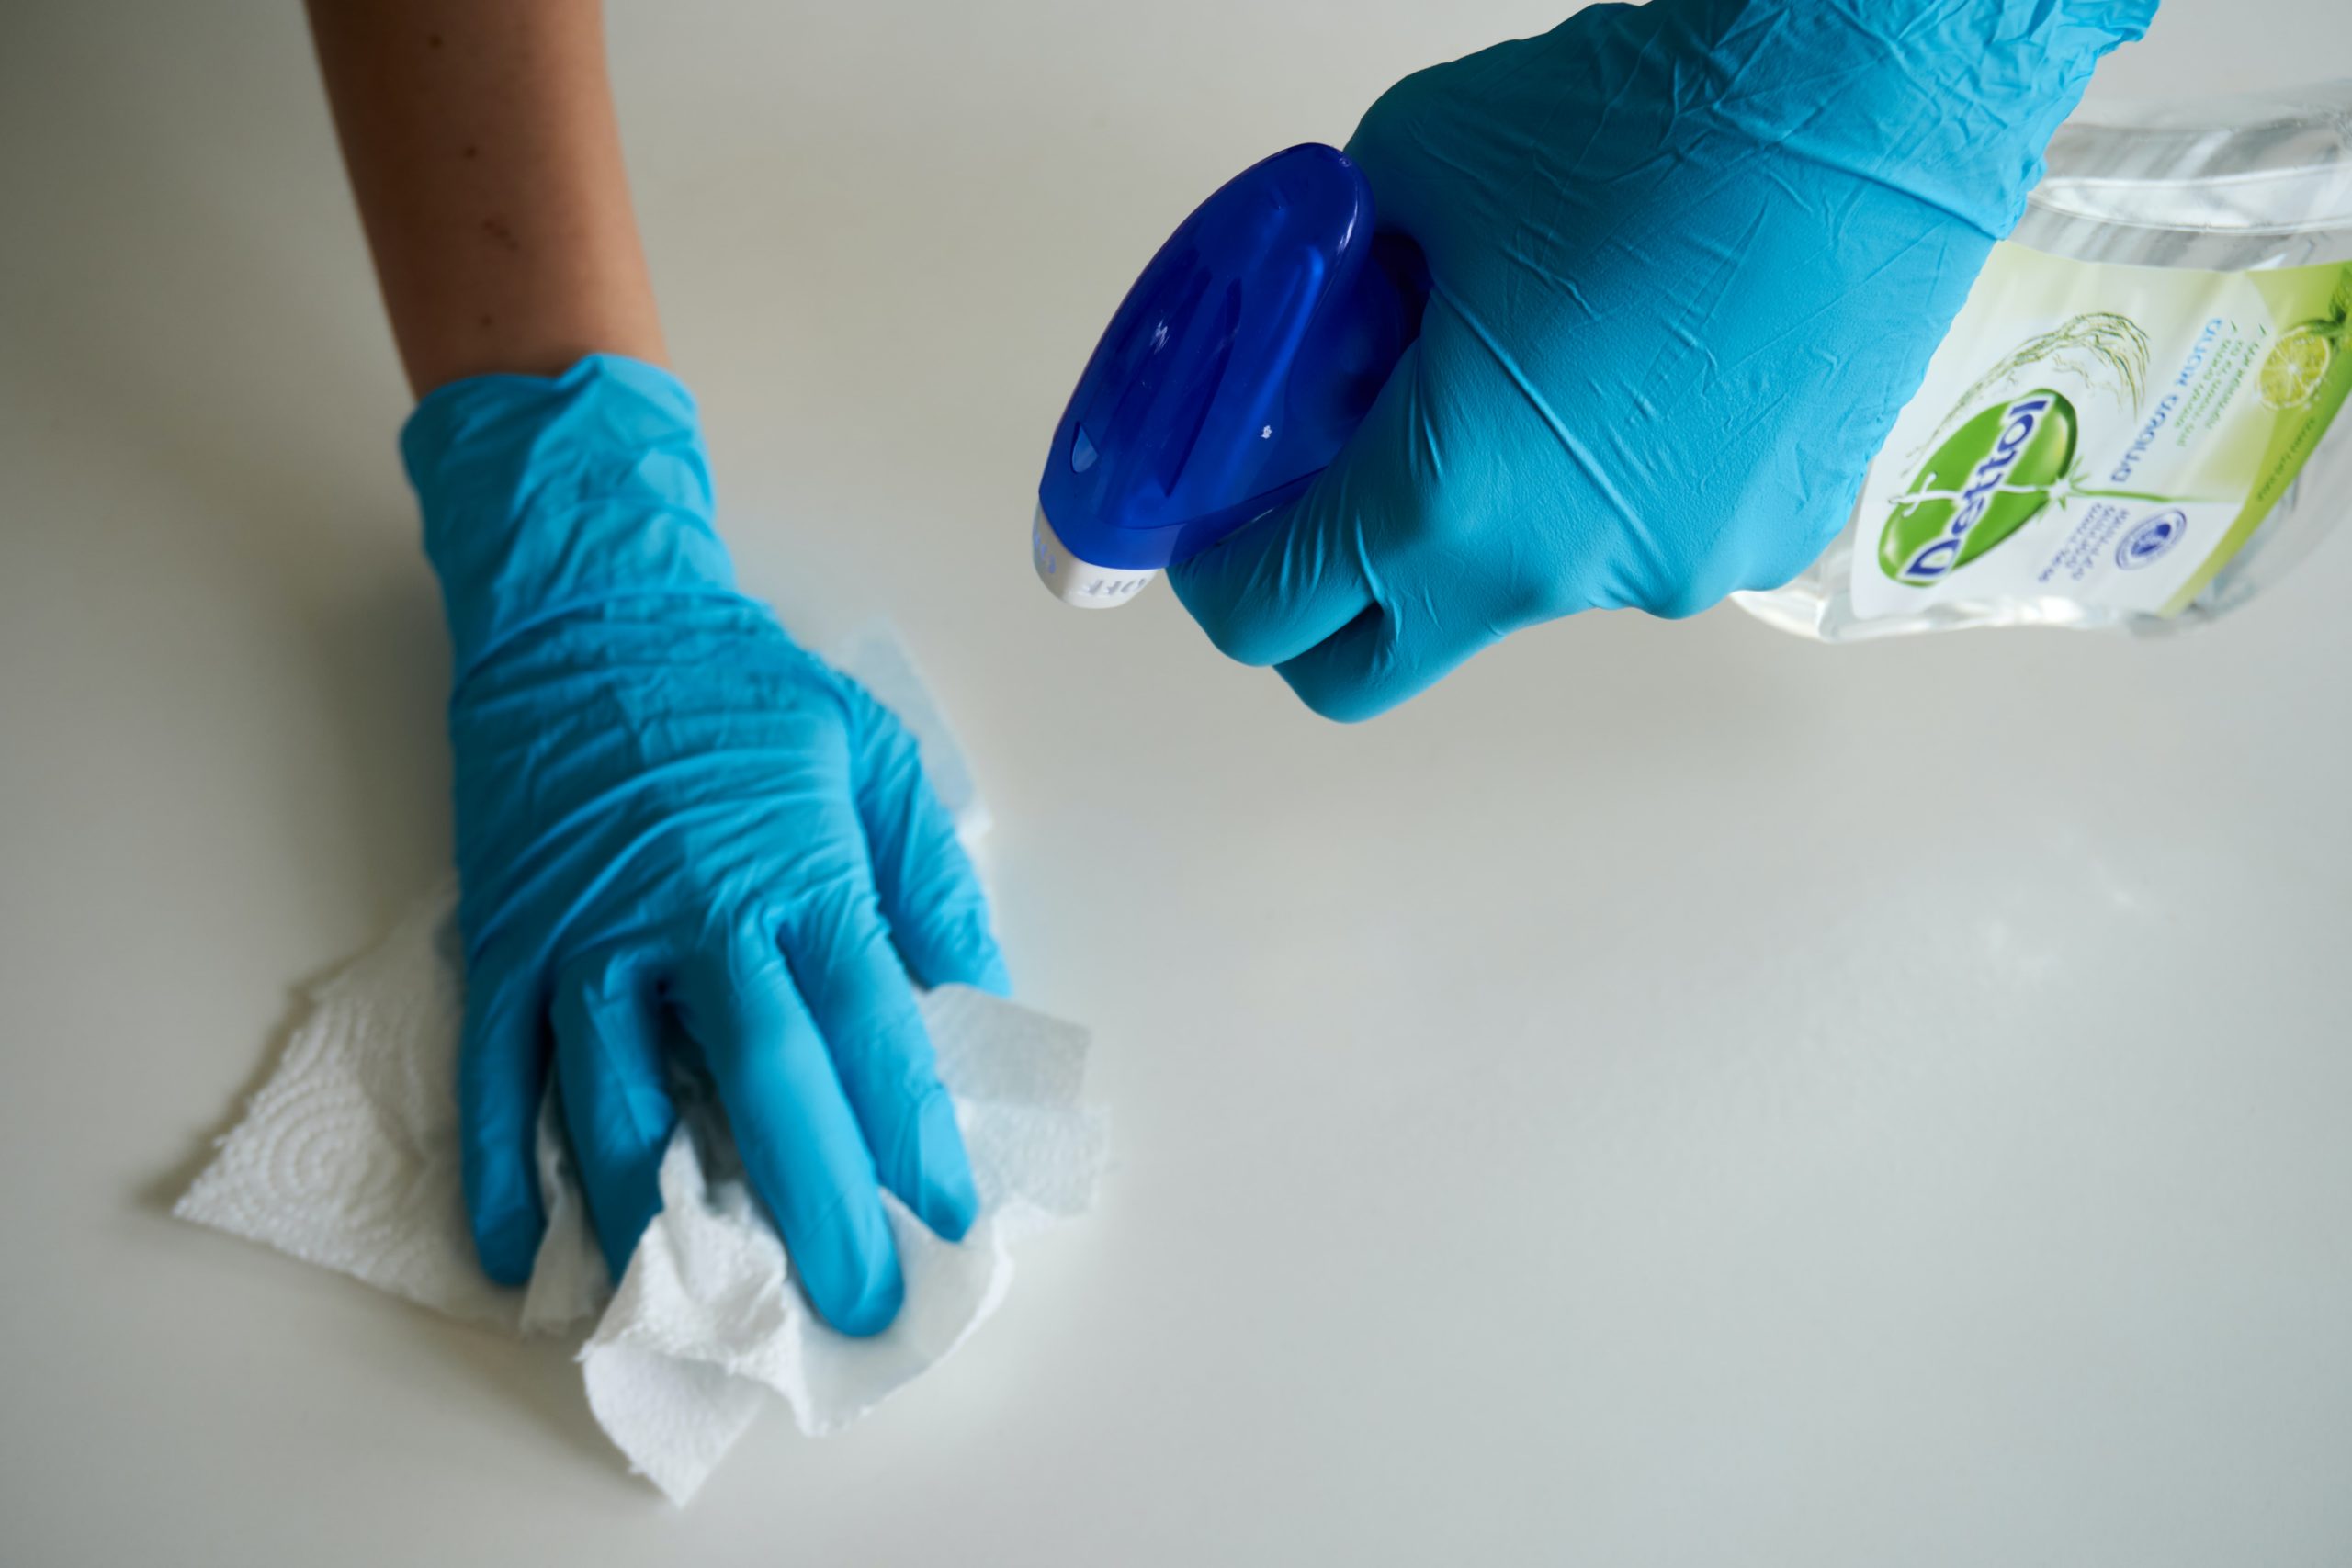 Two hands with gloves cleaning a surface